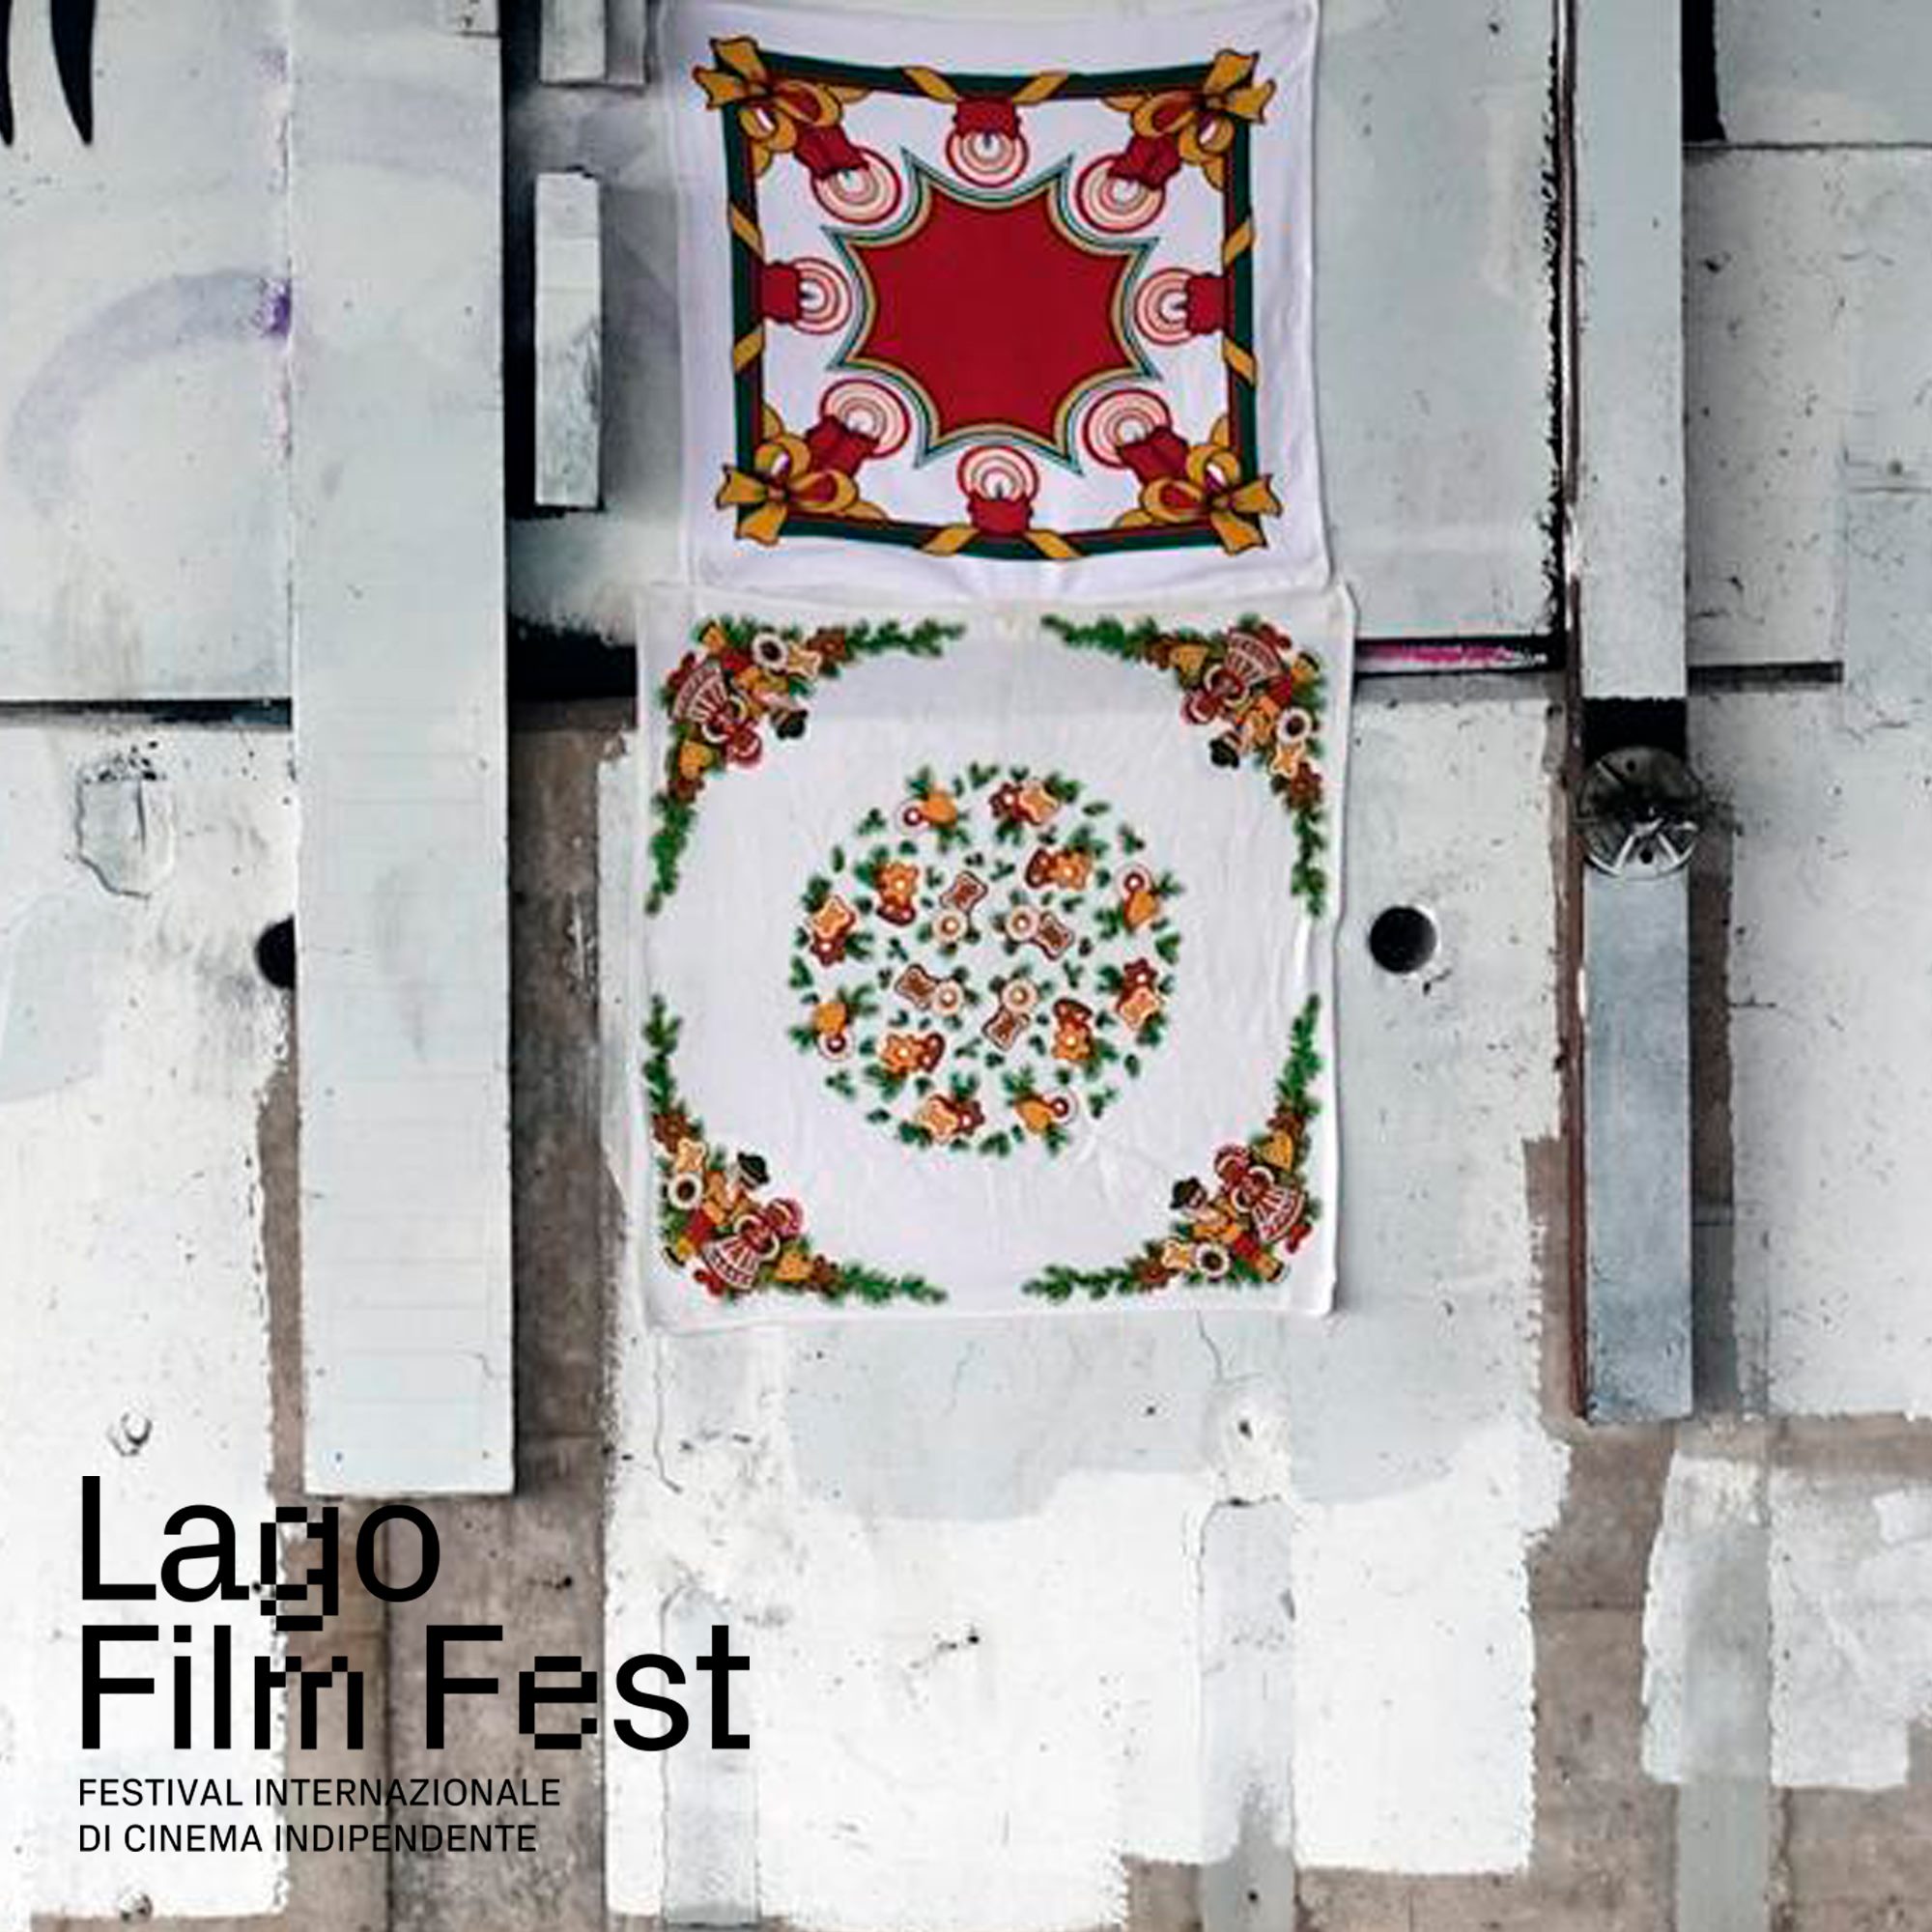 Boom @ the 16th International Festival of Independent Cinema 24 JULY – 02 AUGUST 2020 REVINE LAGO SHORT FILMS – NEW SIGNS COMPETITION LFF 2020, ITALY